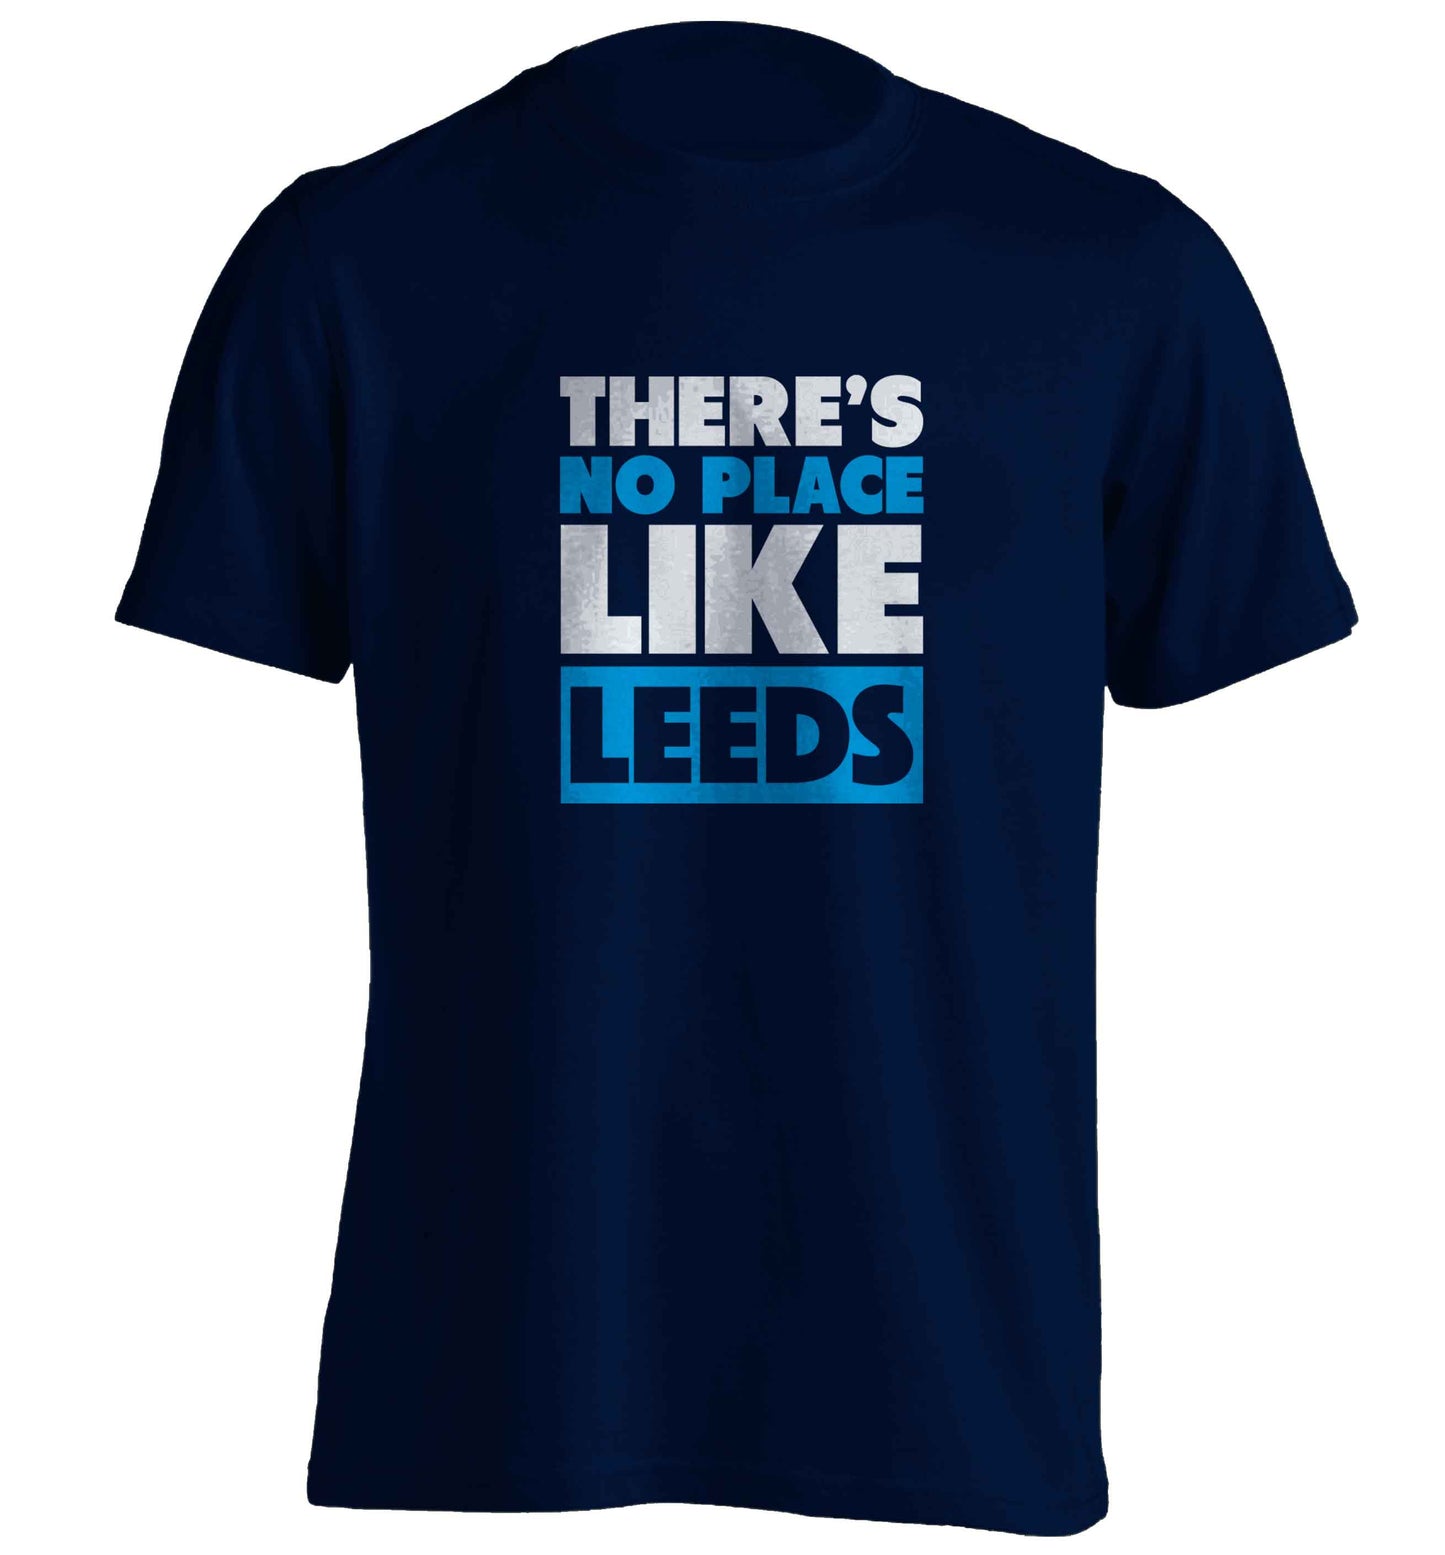 There's no place like Leeds adults unisex navy Tshirt 2XL